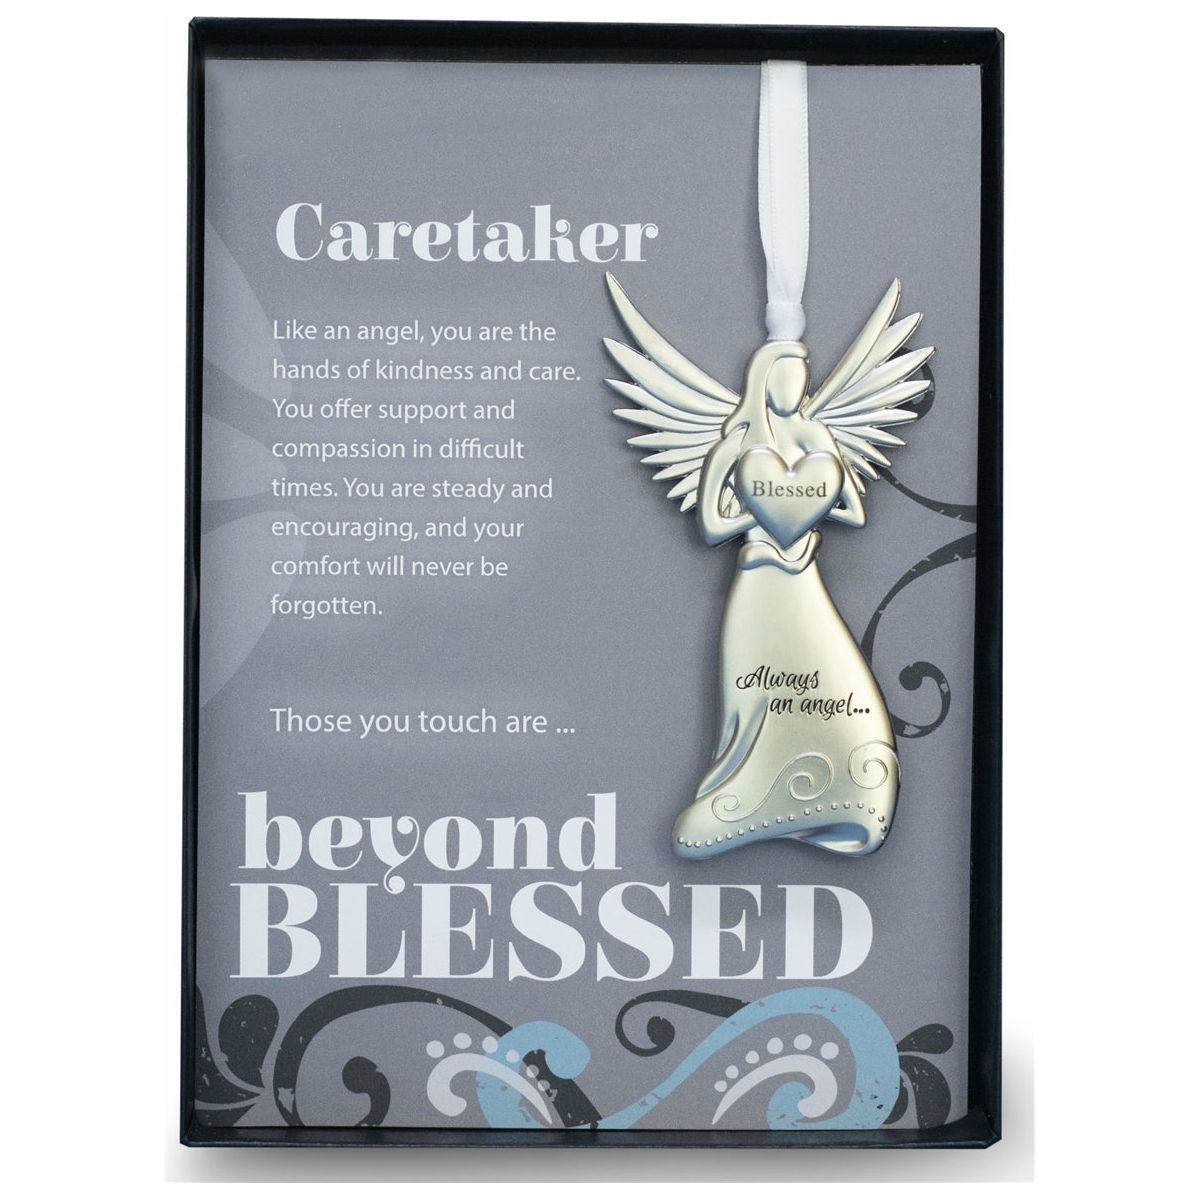 Caretaker Appreciation Gift- 4" metal blessed angel ornament with "Caretaker" Beyond Blessed sentiment in black gift box with clear lid.